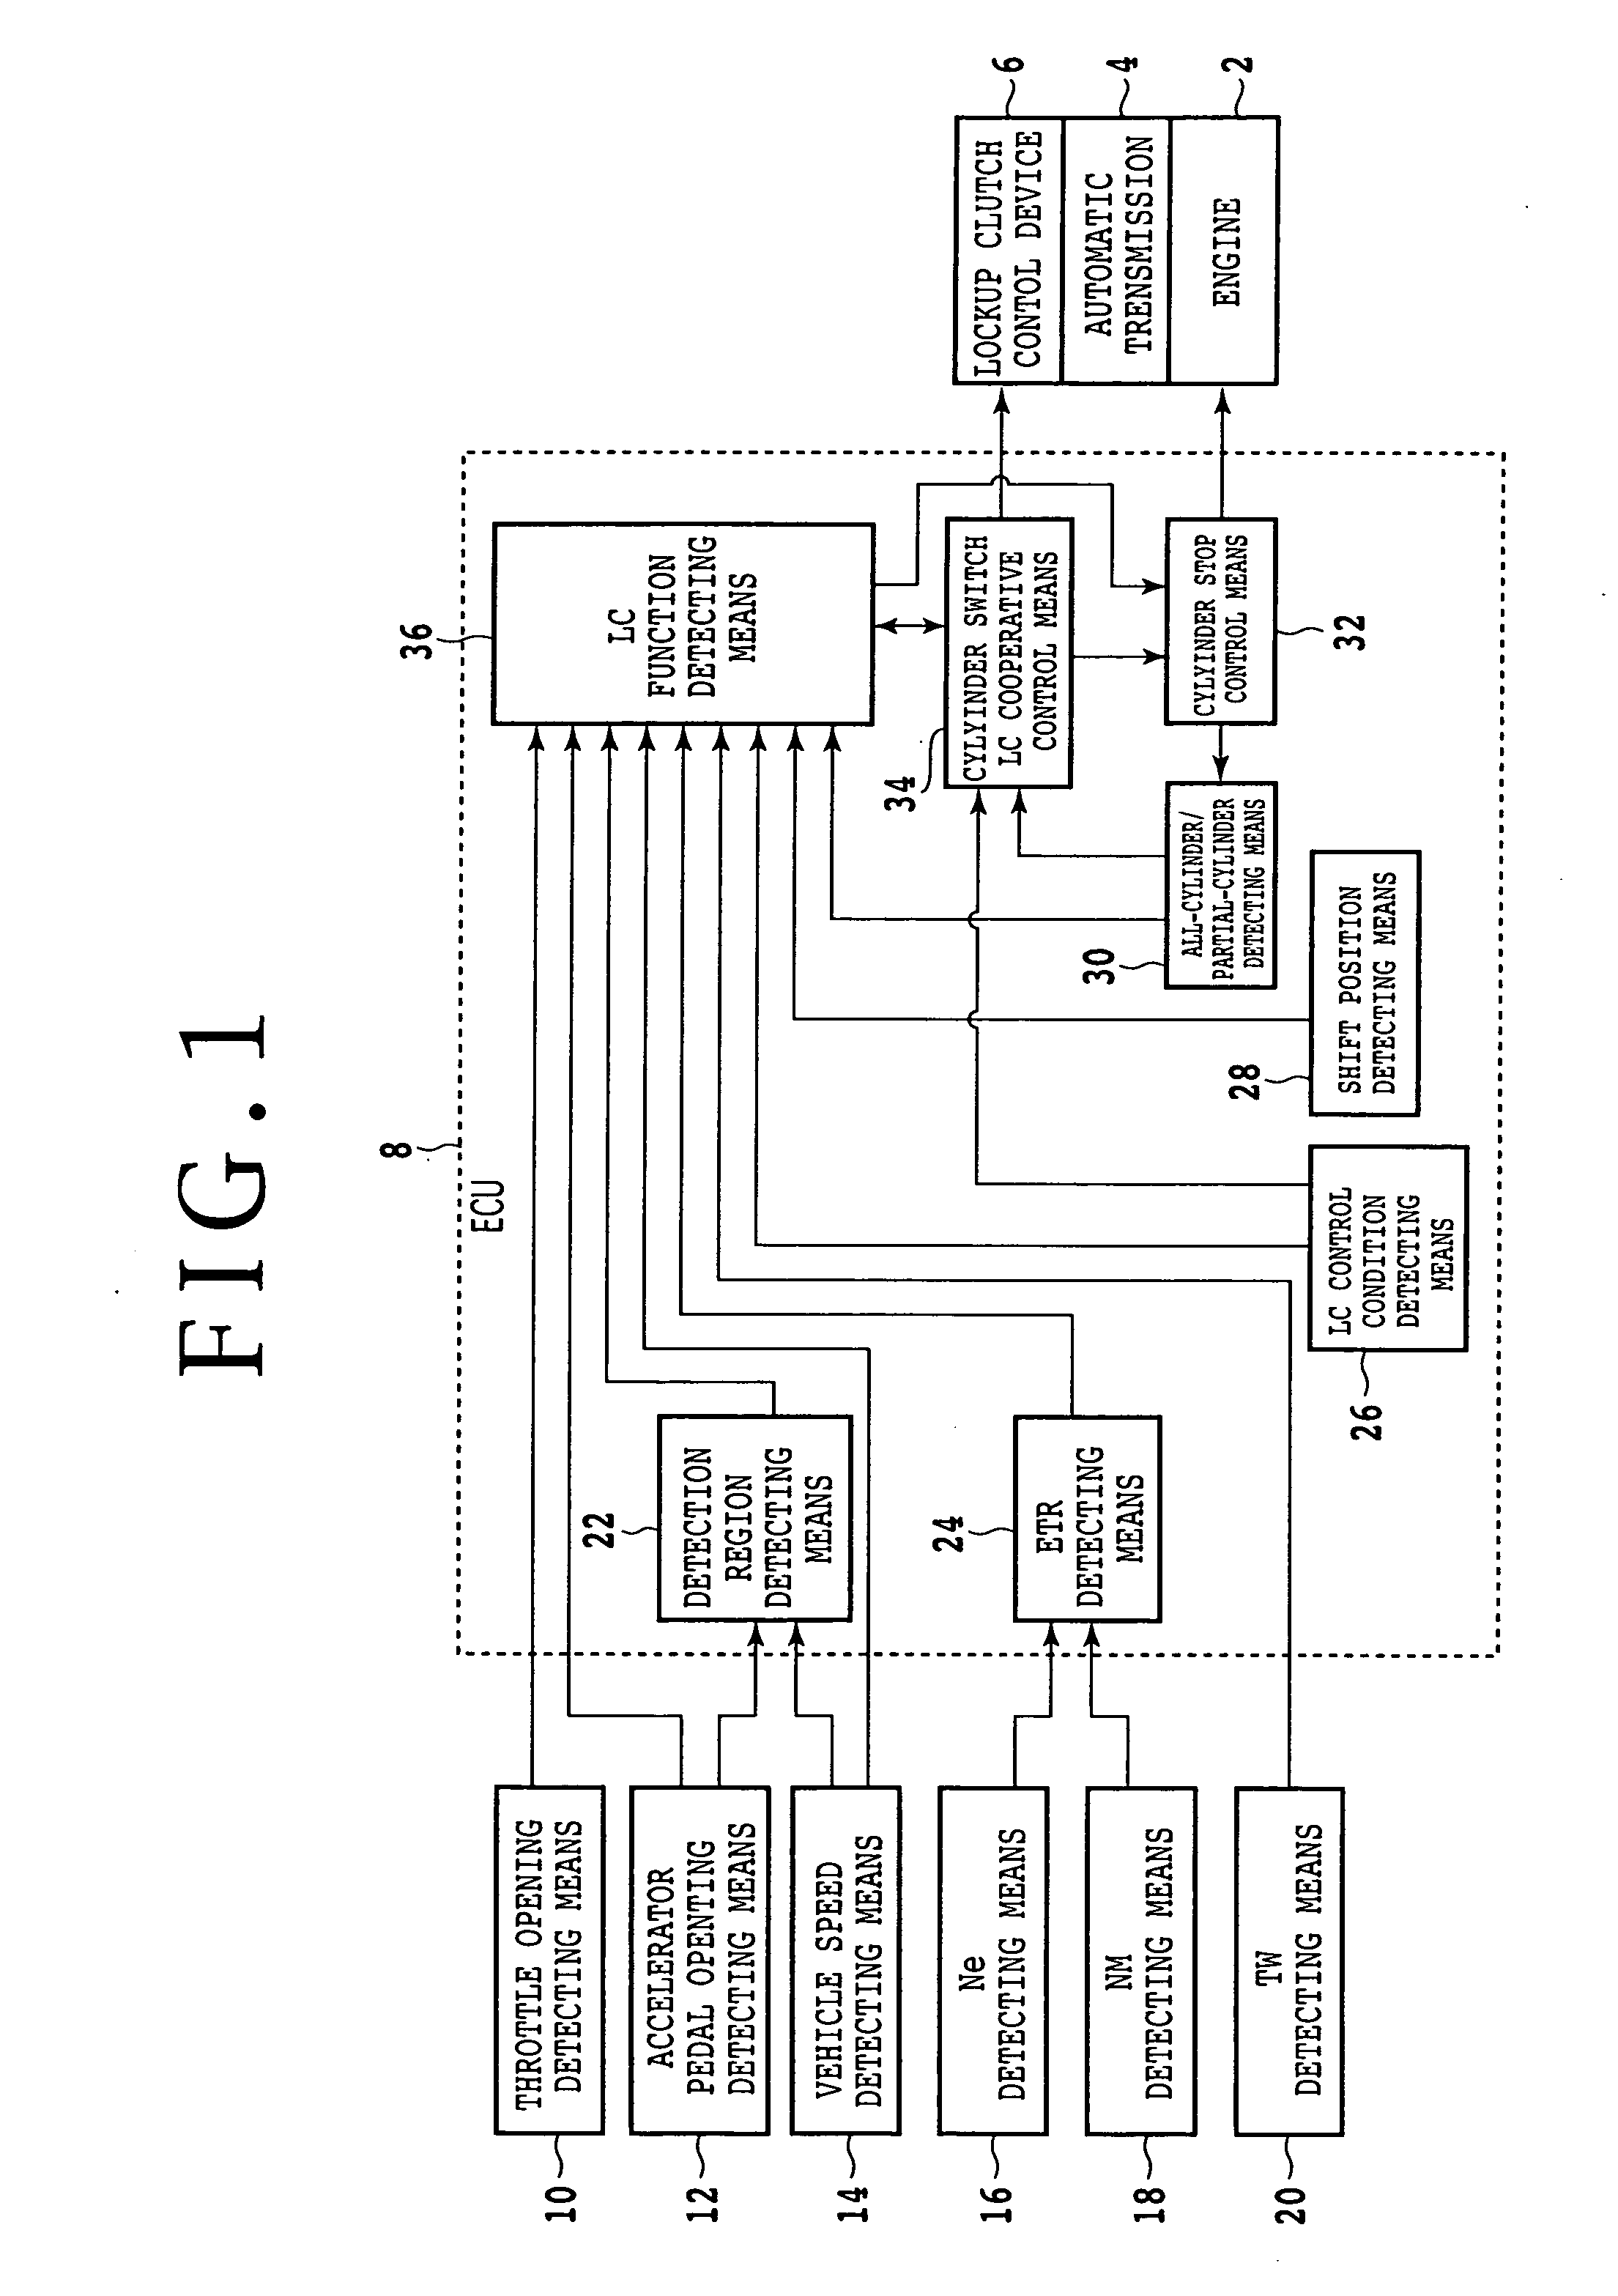 Control system for vehicle having an engine capable of performing and stopping combustion in each cylinder